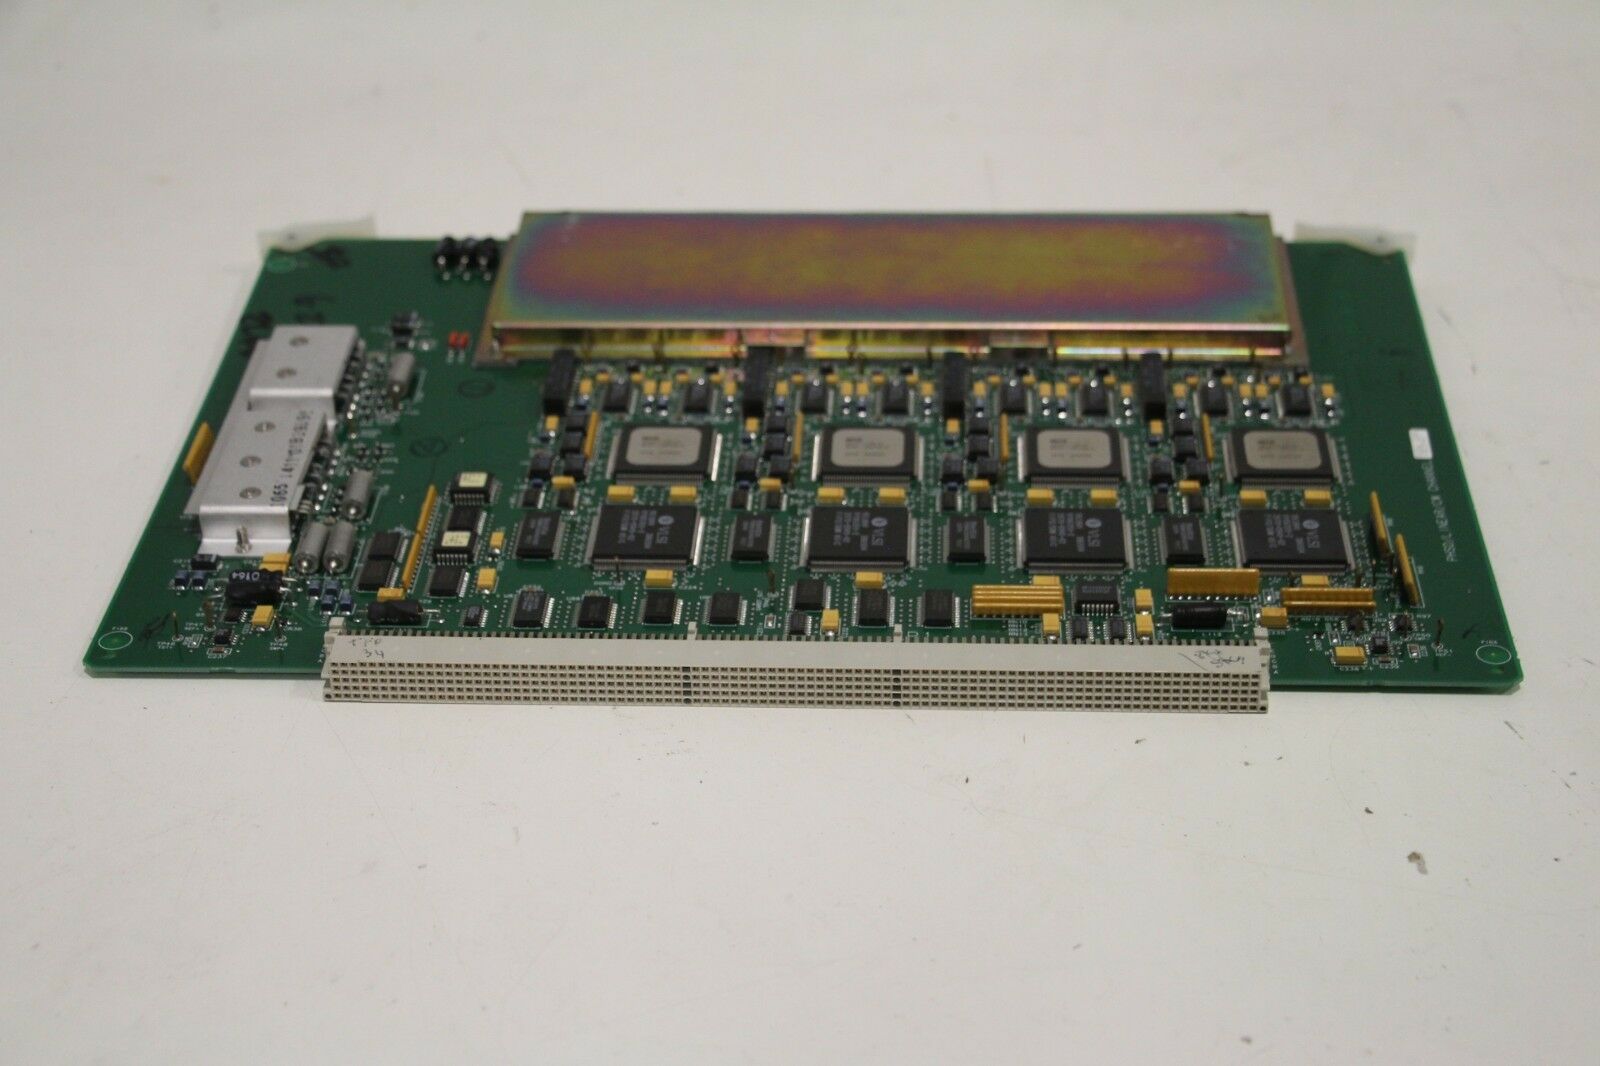 Philips ATL HDI-3000 Ultrasound D2852 7500-0819-07 PHSD Linear CW Channel PCB As DIAGNOSTIC ULTRASOUND MACHINES FOR SALE